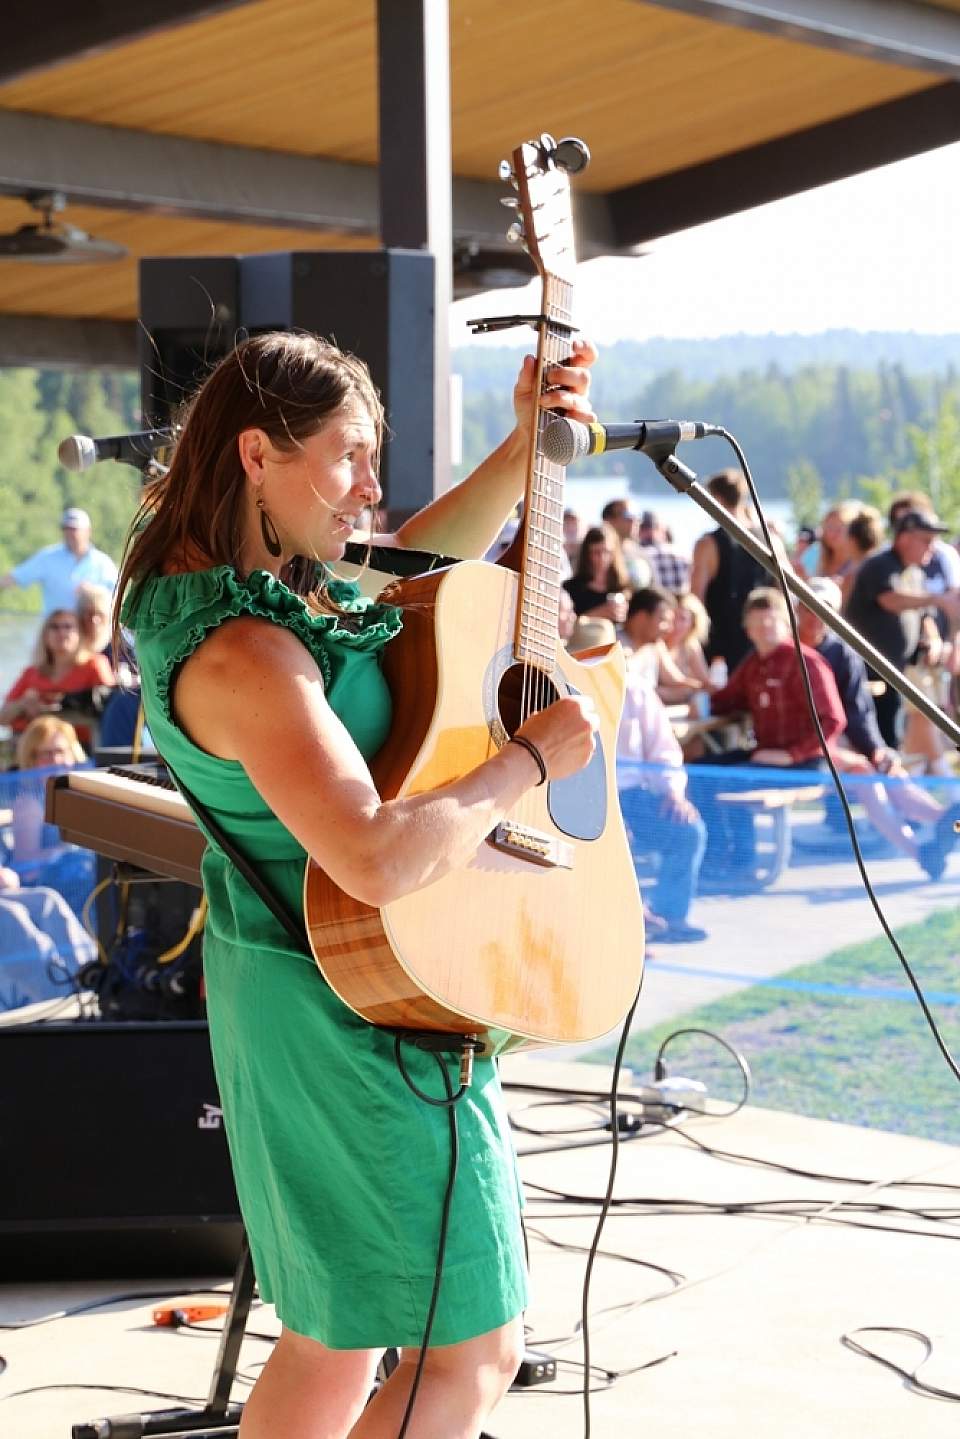 Soldotna Creek Park offers an array of events throughout the year